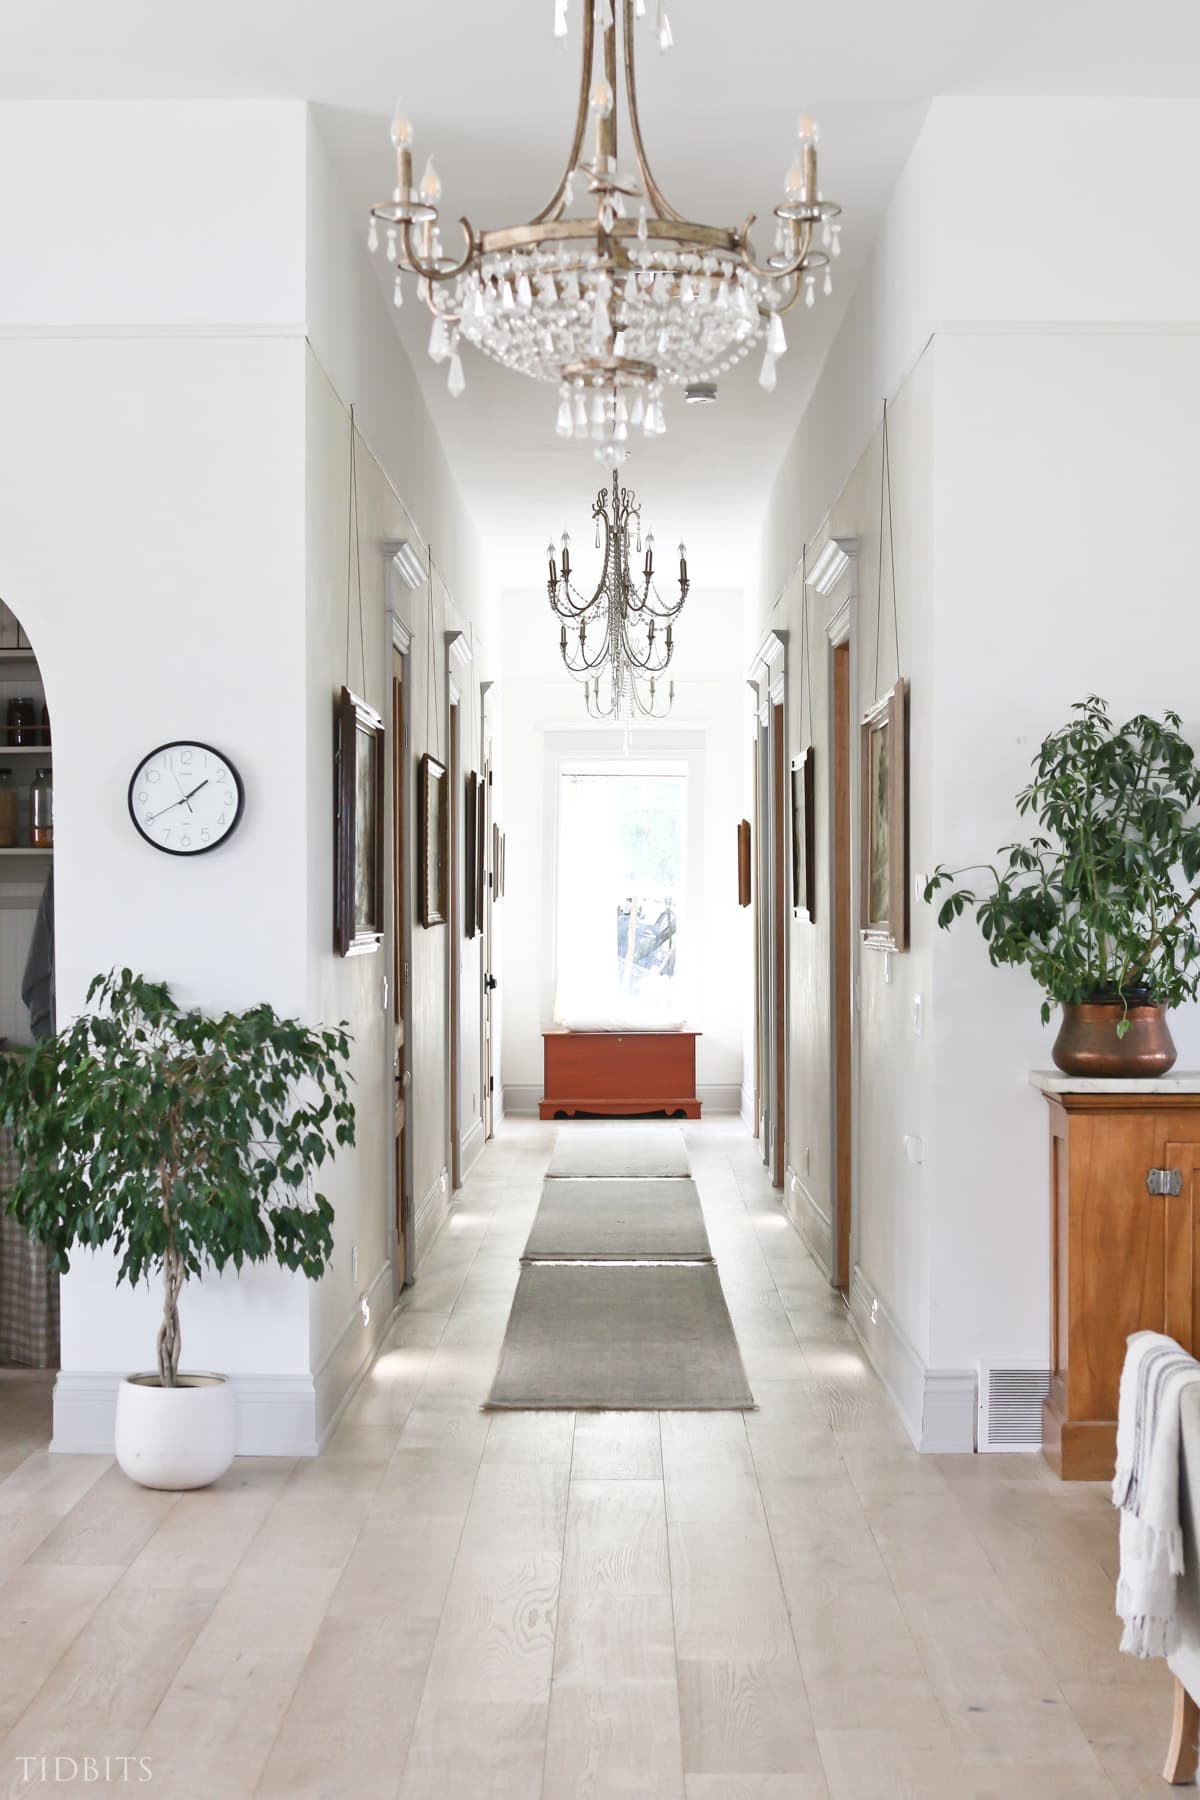 Hallway with large wall art, doors and chandeliers